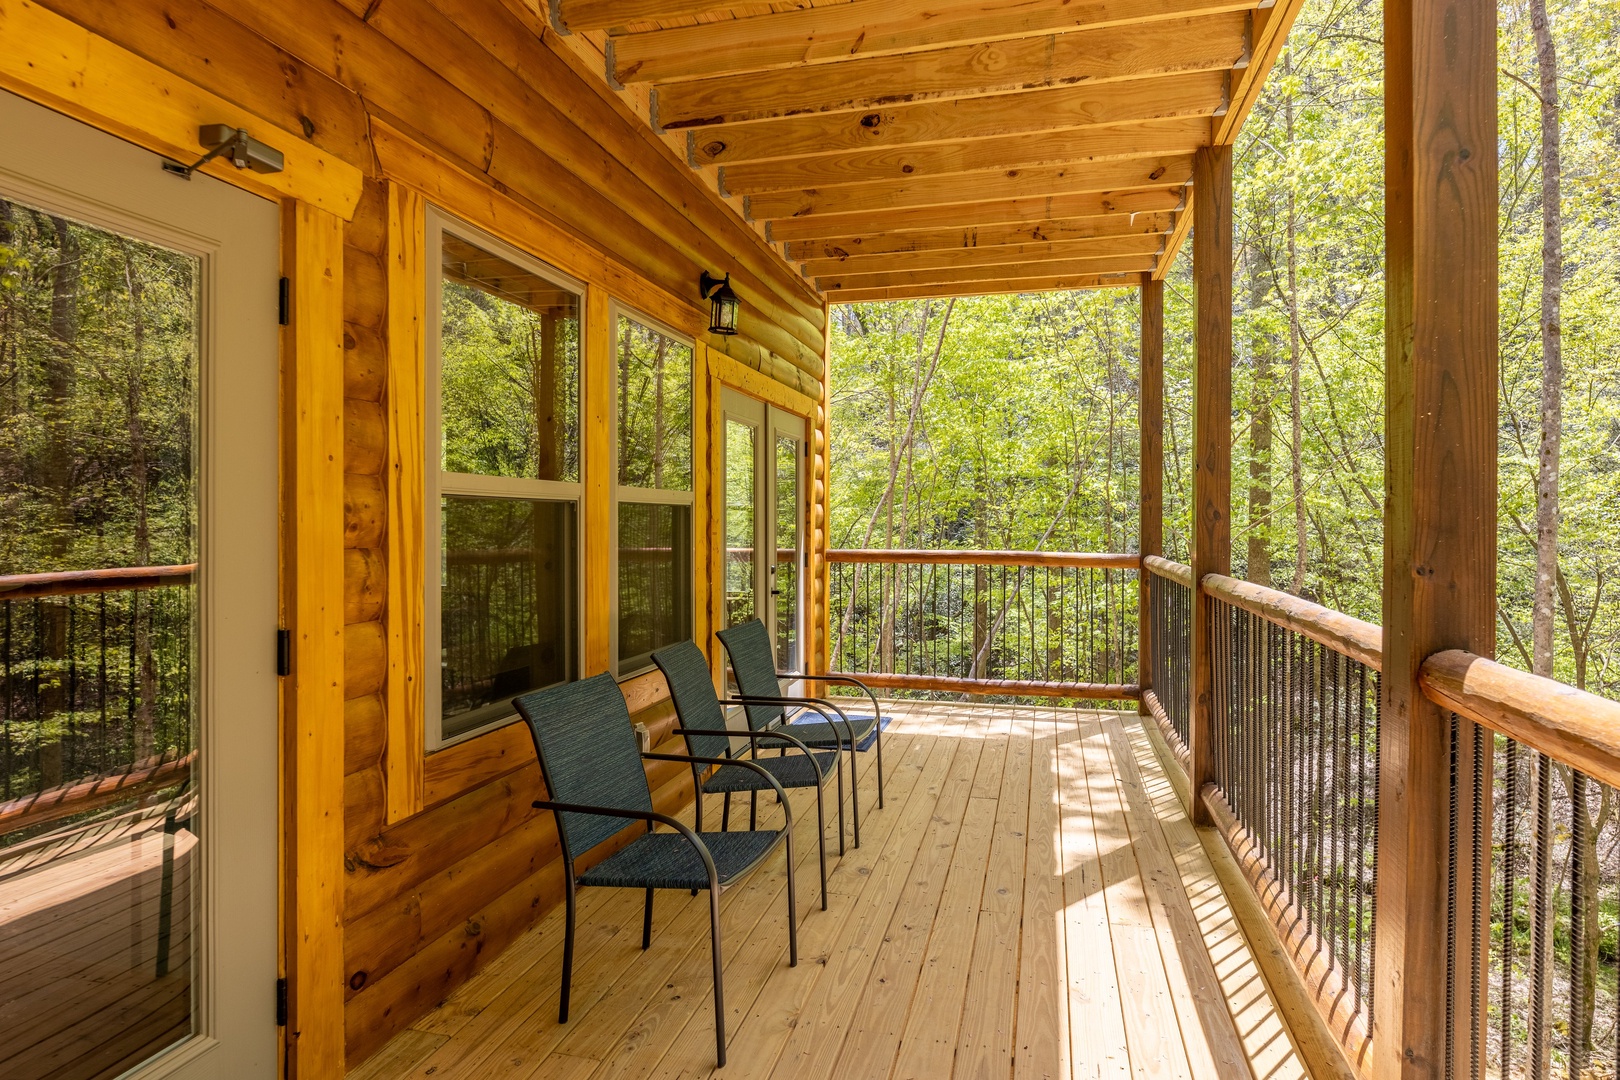 Deck seating at Poolin Around, a 2 bedroom cabin rental located in gatlinburg